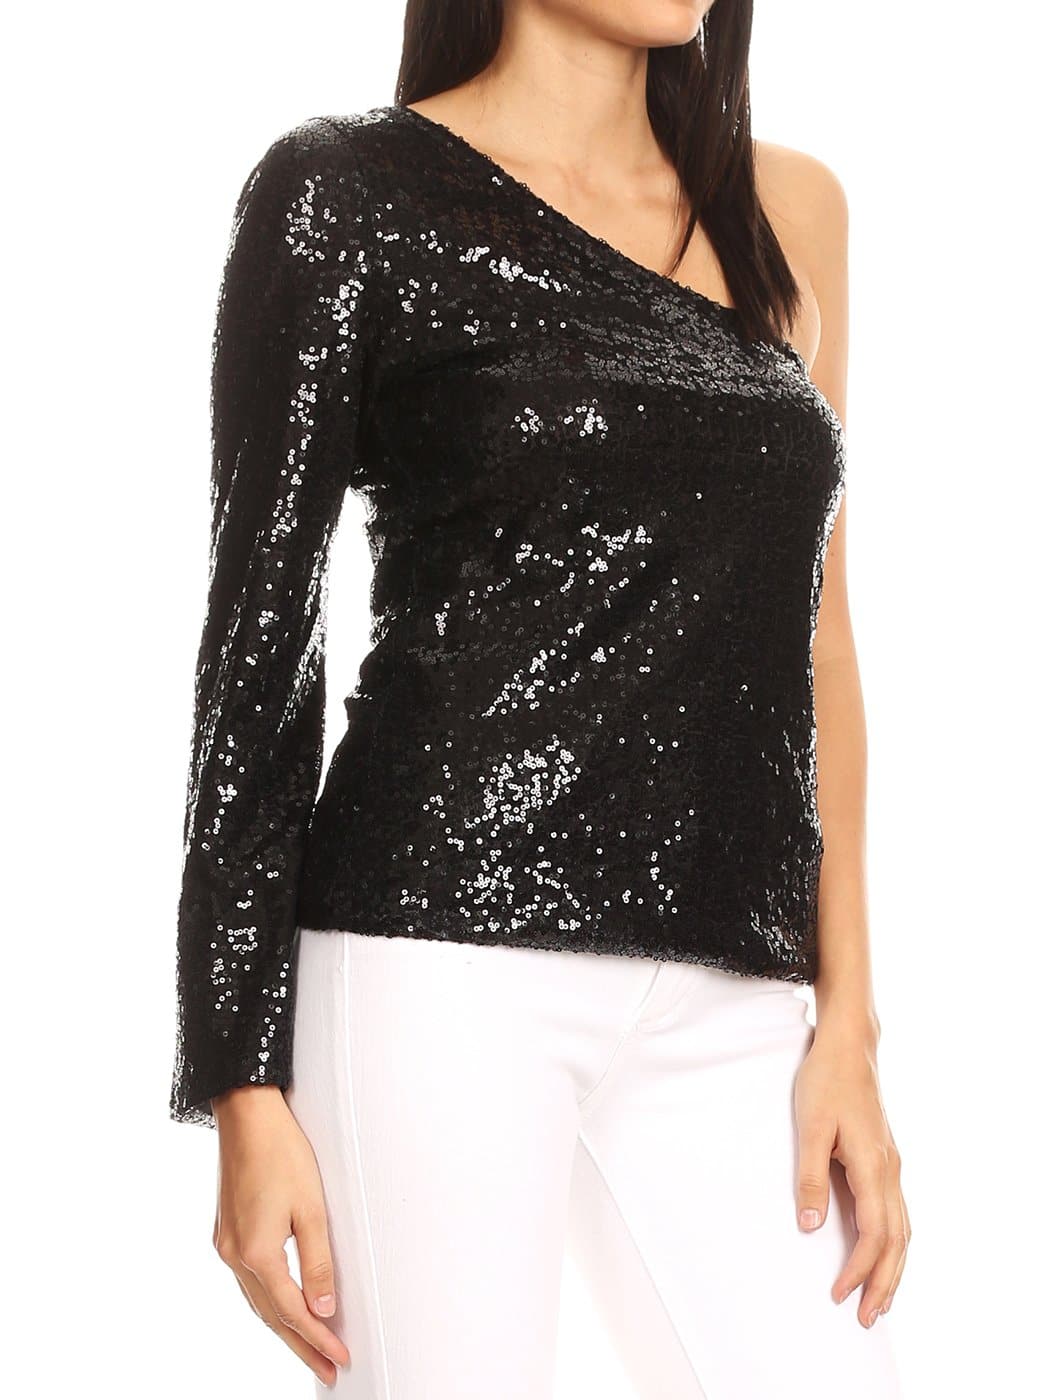 ANNA-KACI One Shoulder Sequin Top Party Blouse for Women by Anna-Kaci | Alilang